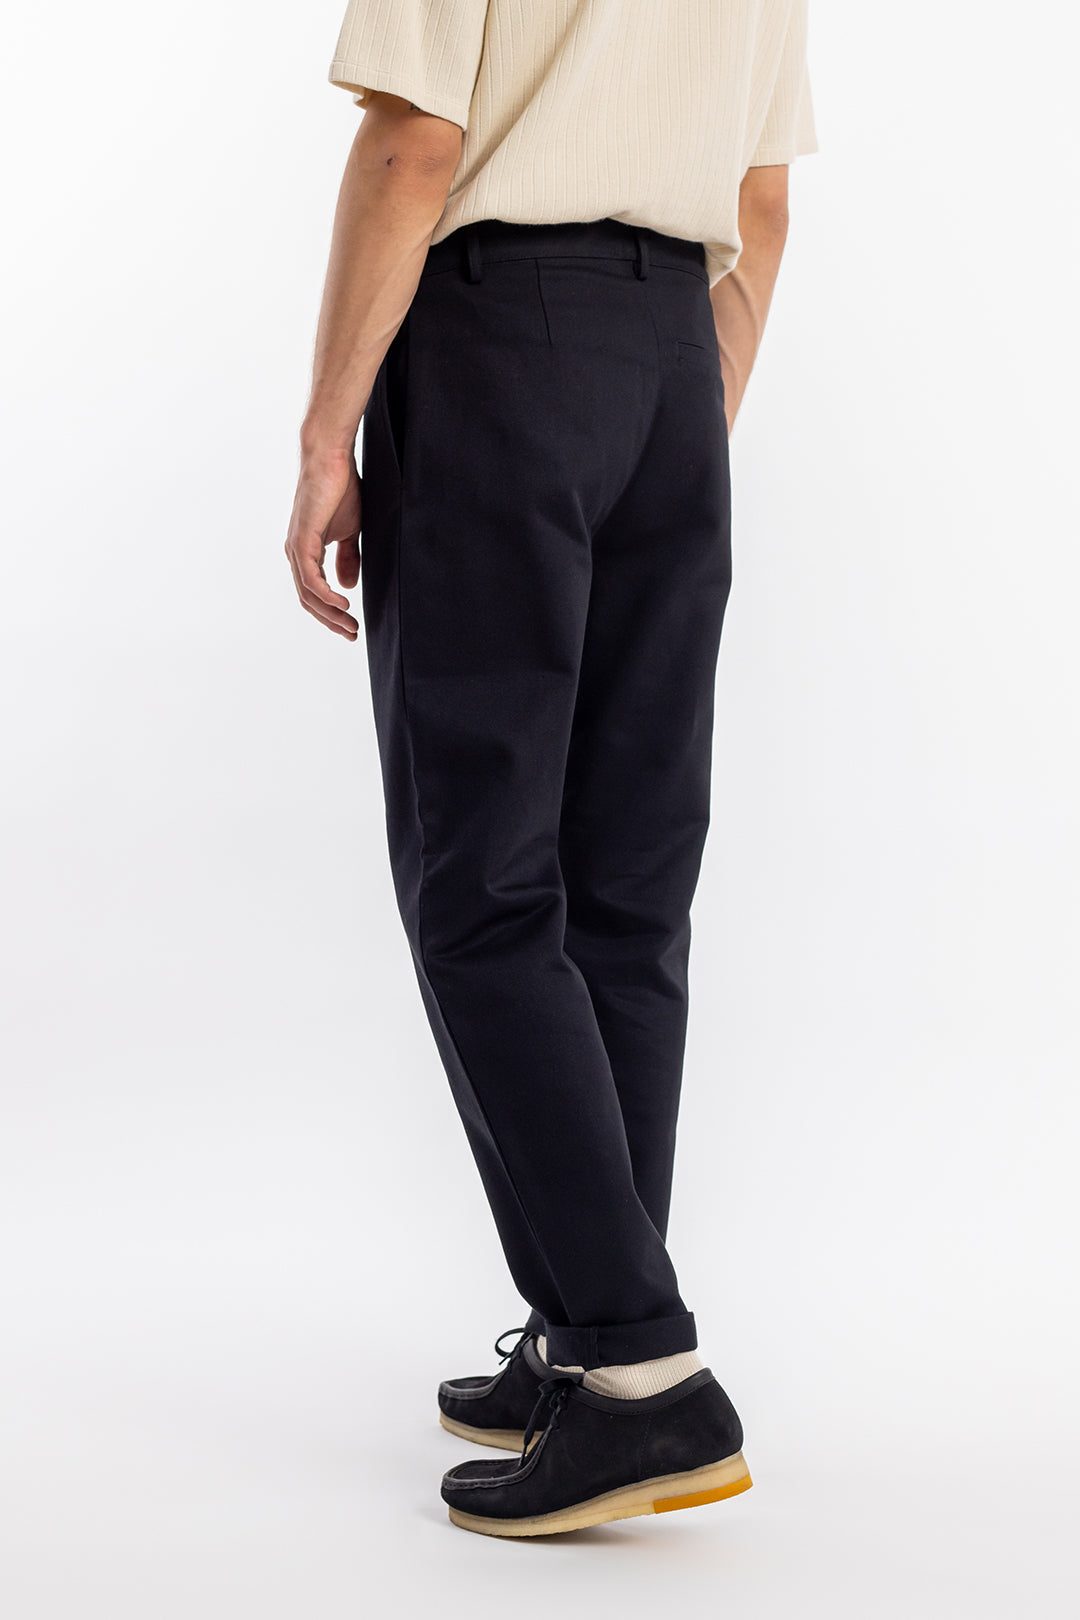 Black trousers made from 100% organic cotton from Rotholz